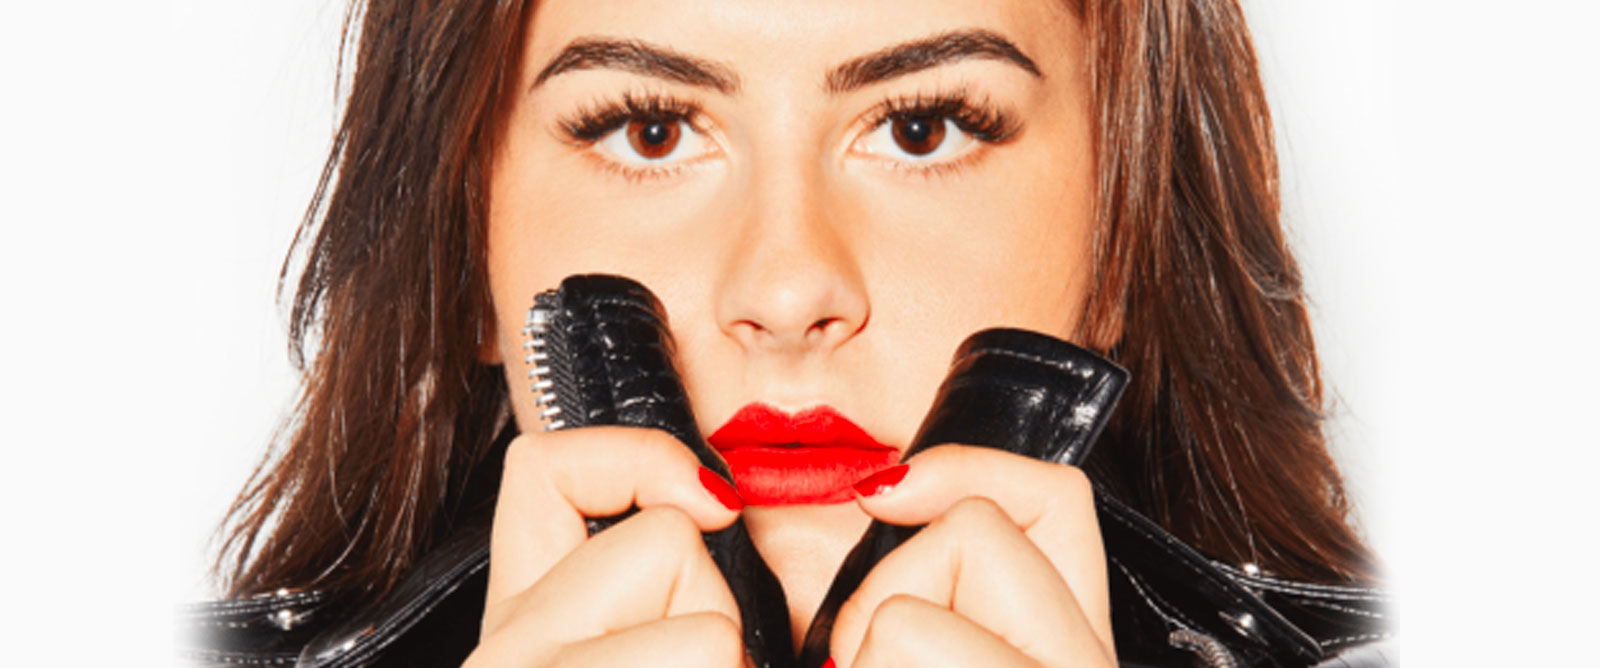 Exclusive: Bianca Andreescu Teams up With Vegan Beauty Brand P8NT